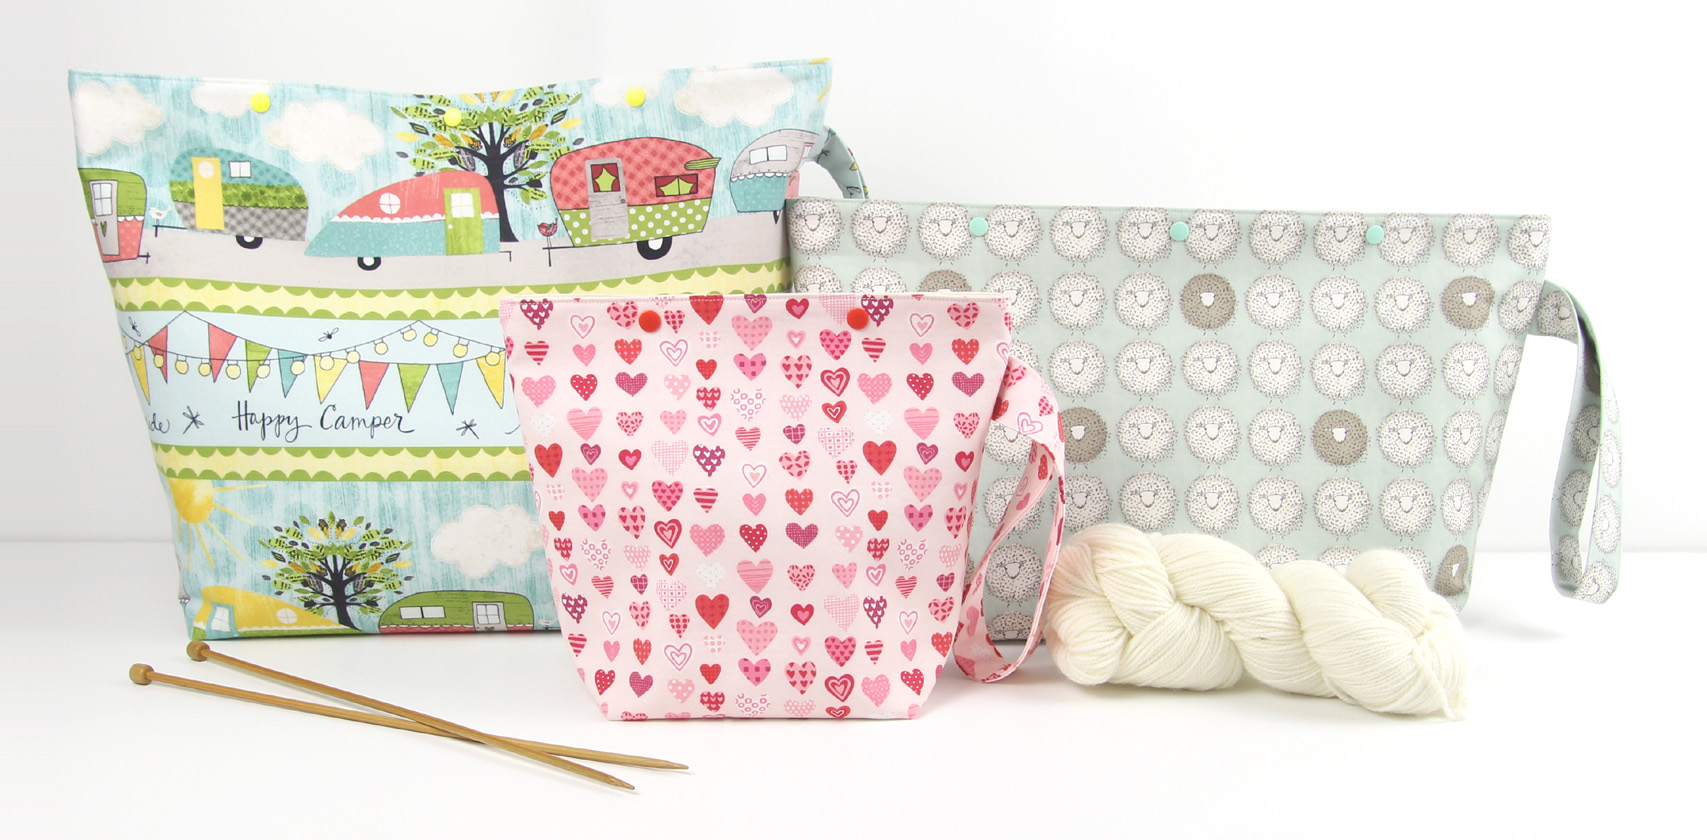 Project bags for knitting and crochet